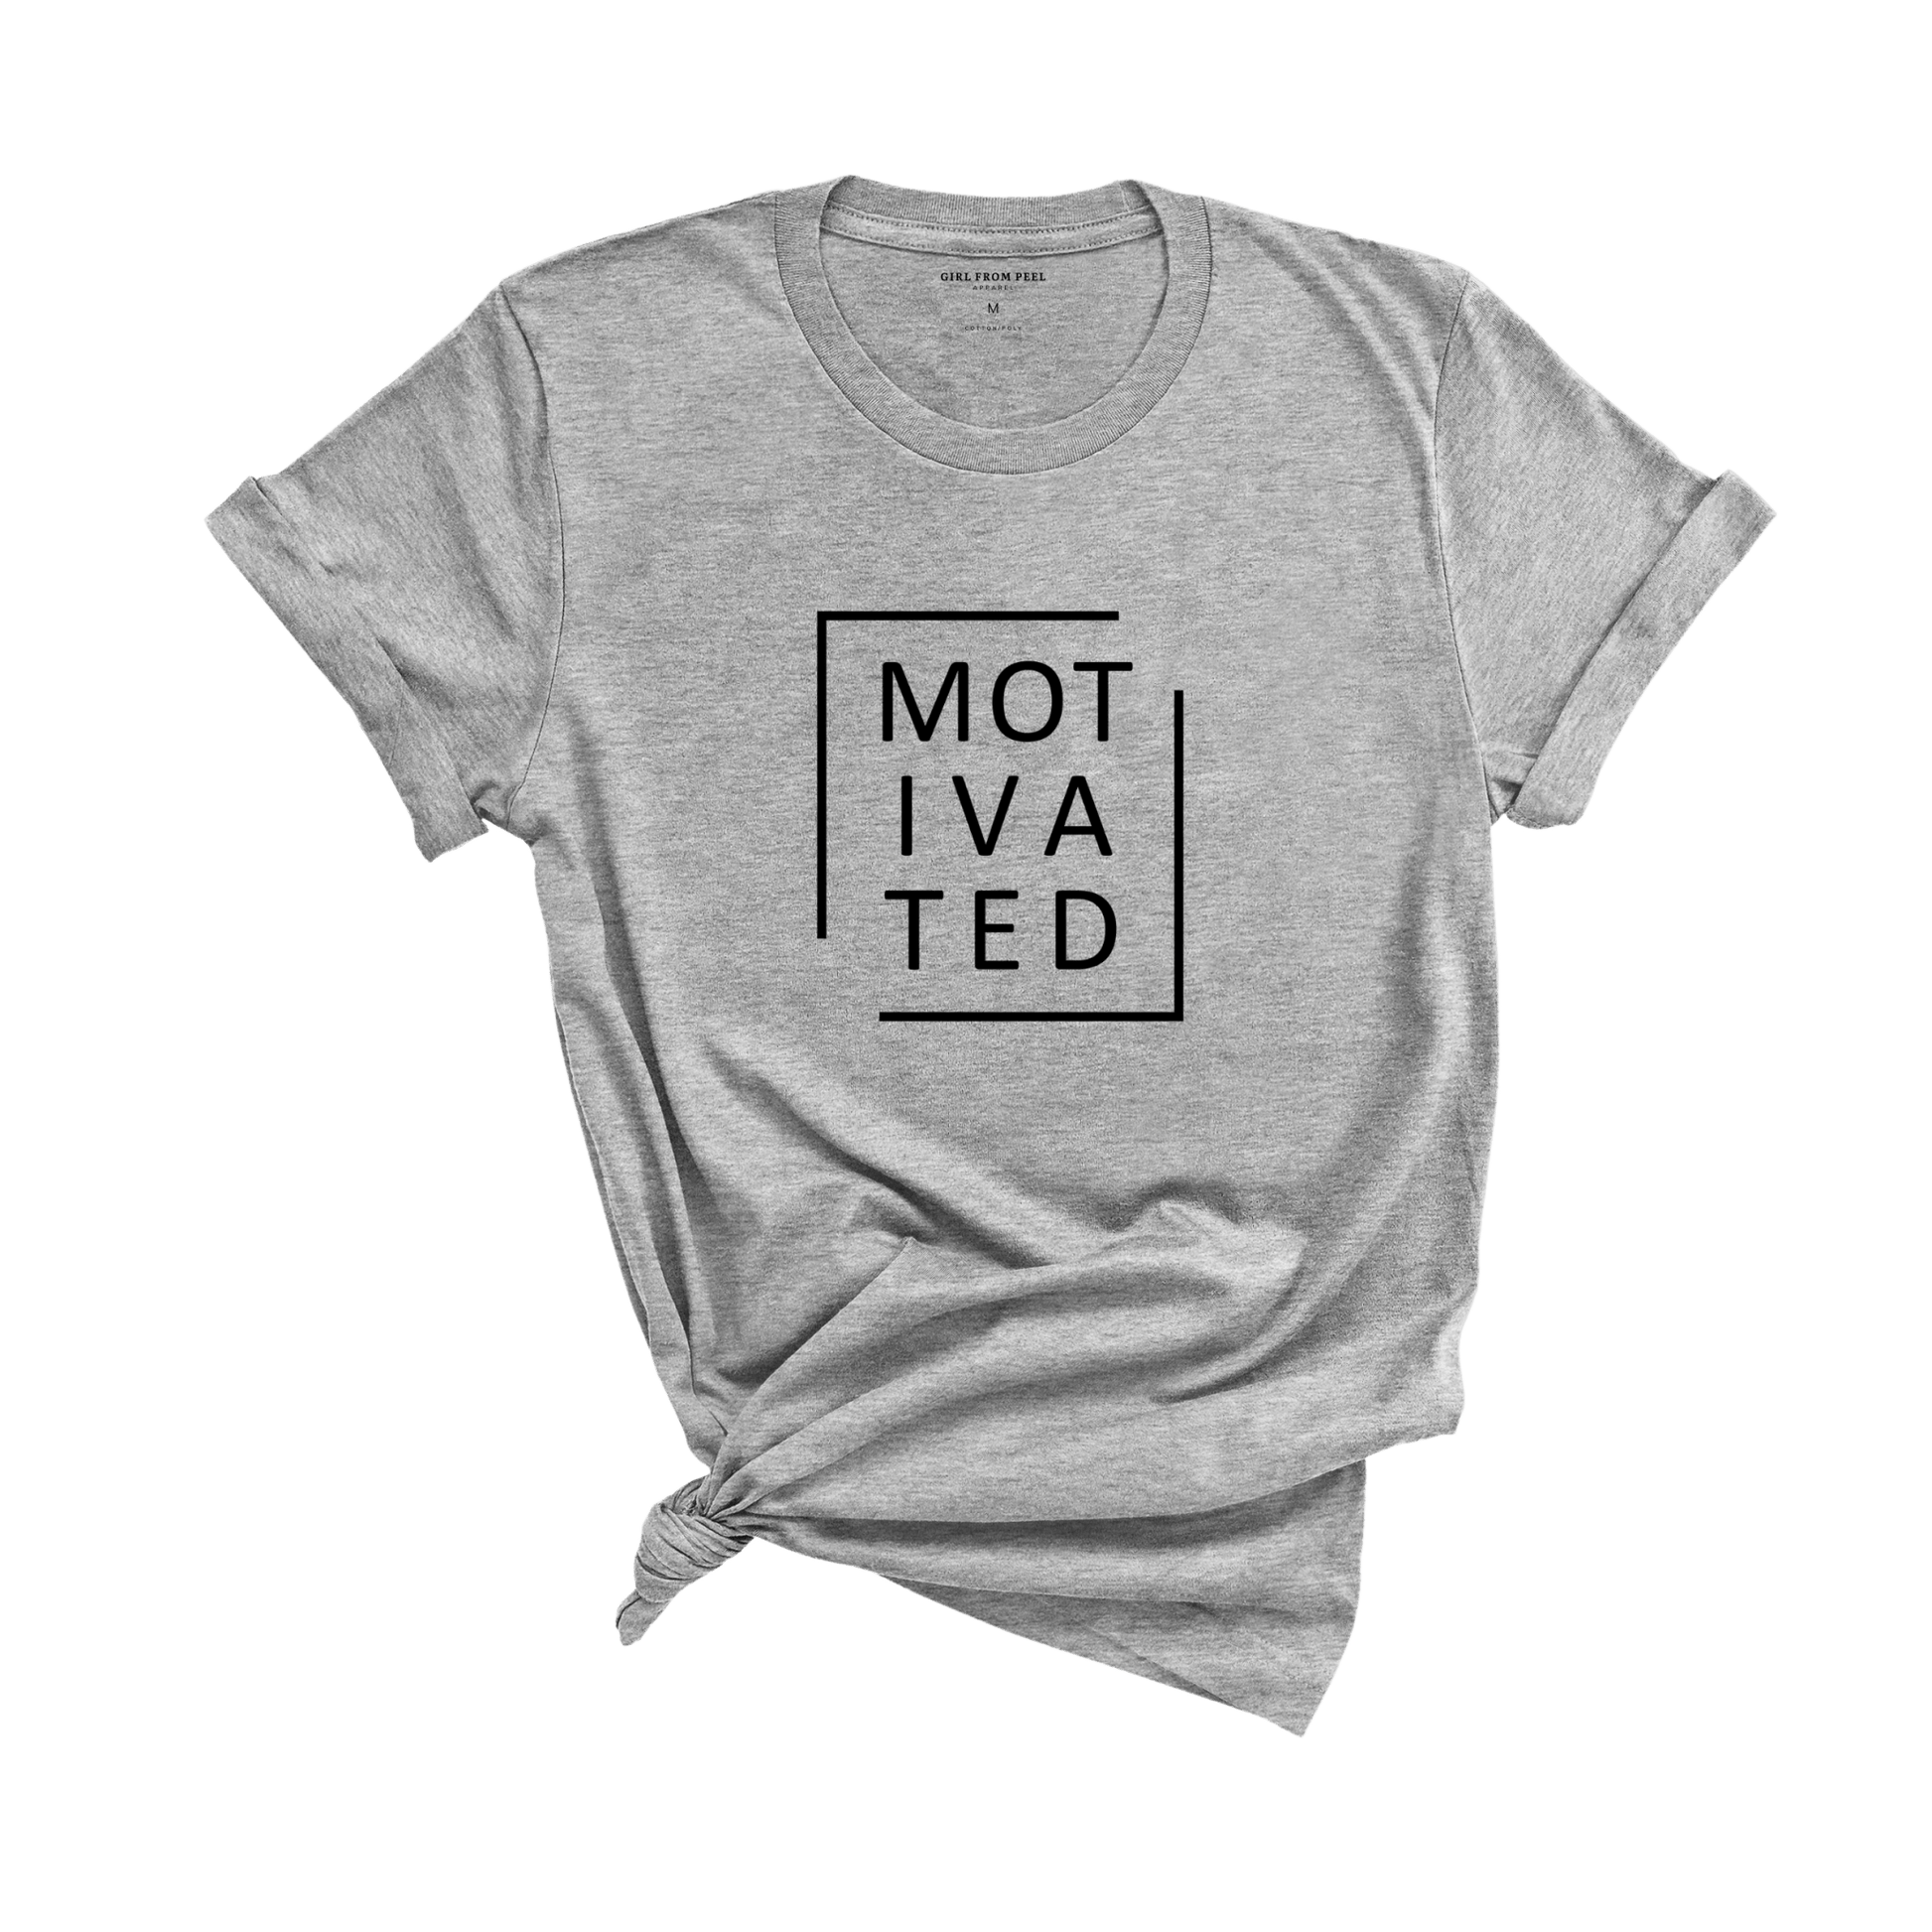 Motivated Tee - Girl From Peel Apparel - T-Shirt